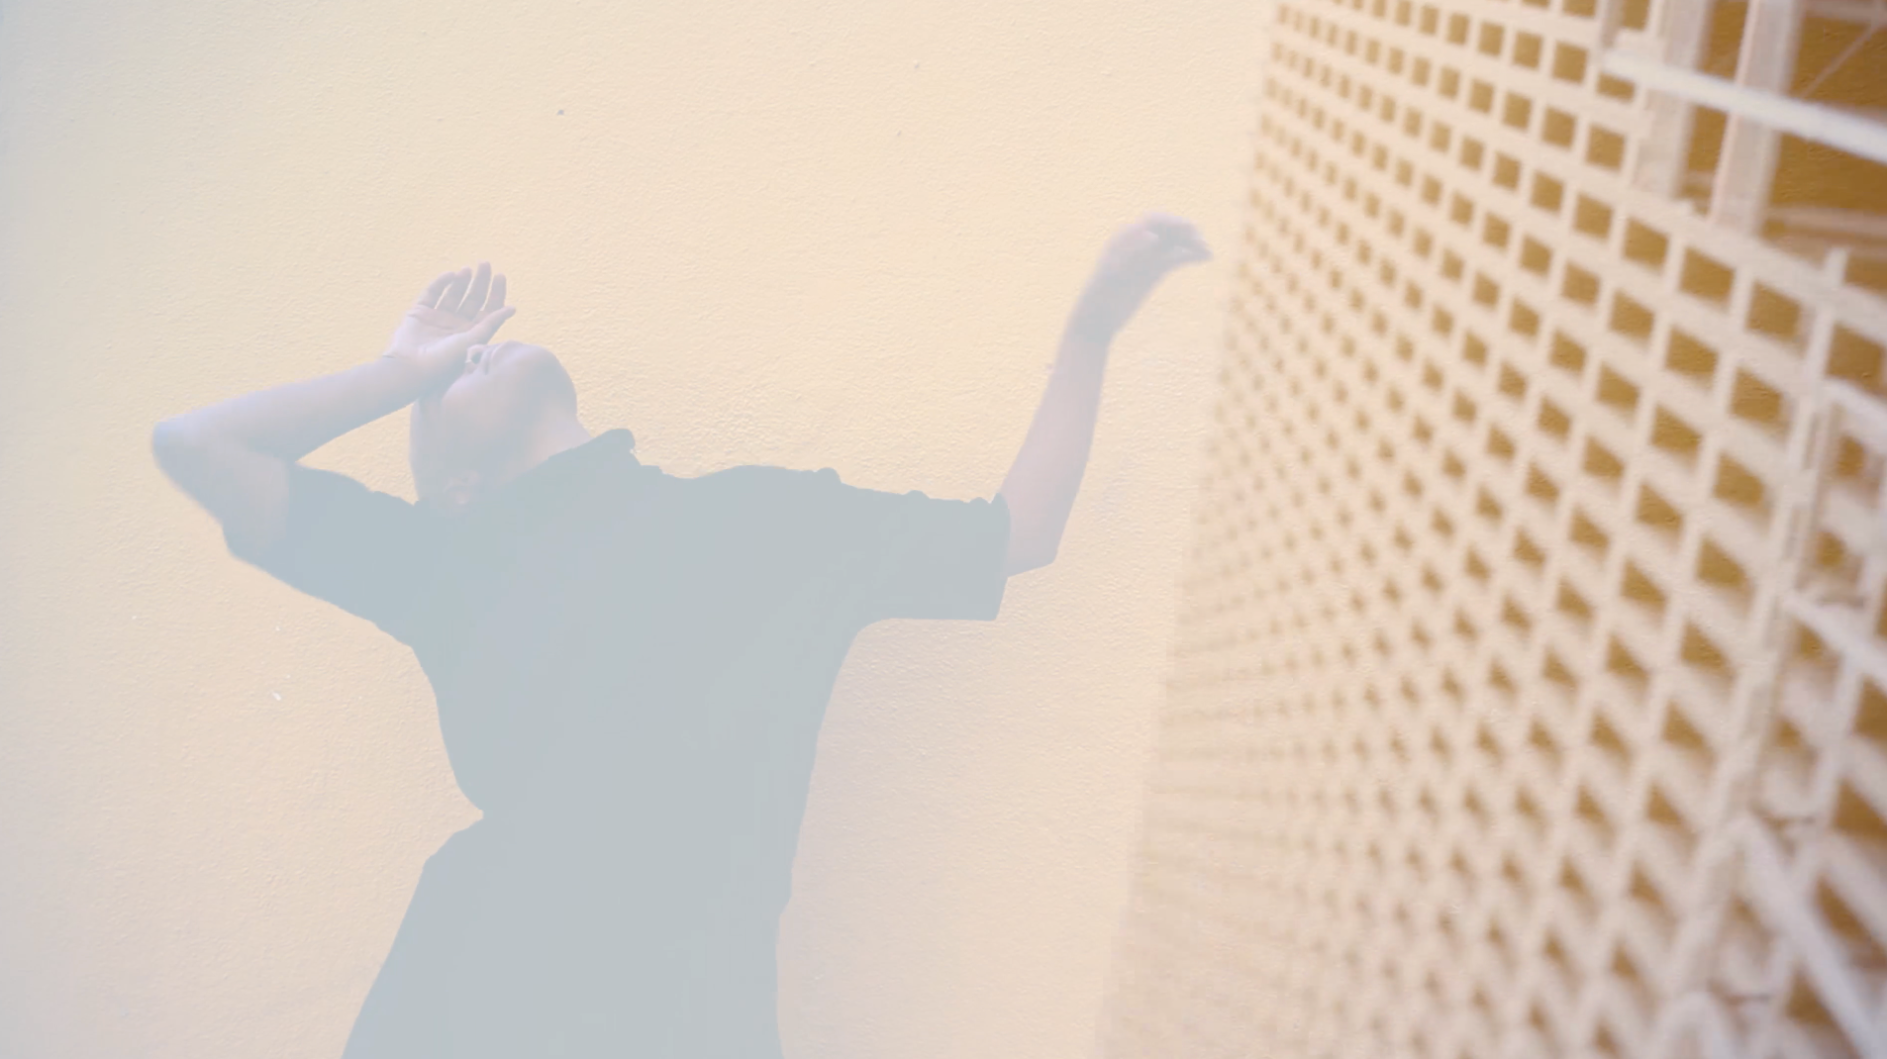 Still image from Ode to an Architect film showing the main protagonist dancing silhouette overlayed on a building seen from the below on the street. The colours are pale yellows, grey and brown.